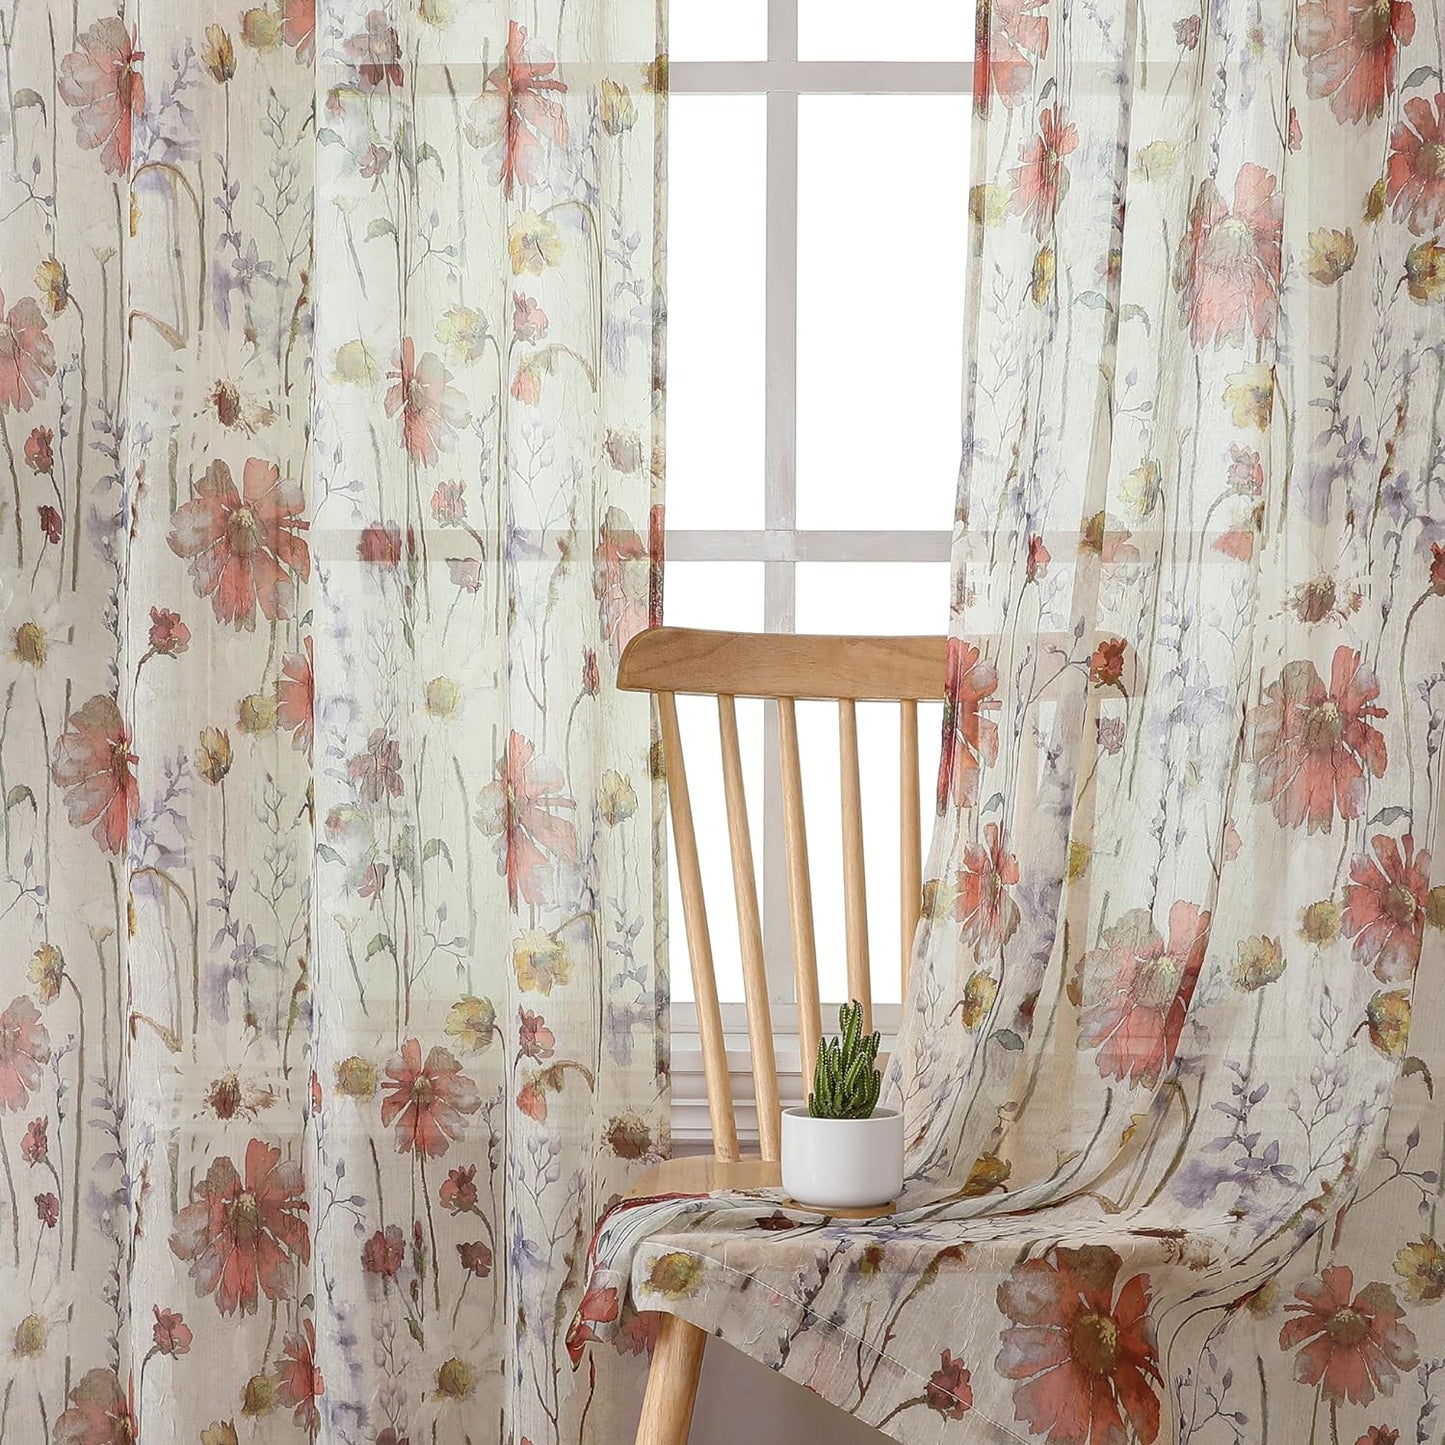 OWENIE Crushed Semi Sheer Curtains 72 Inches Length 2 Panels, Floral Pattern Design Rod Pocket Light Filtering Farmhouse Curtains for Bedroom Living Room, 2 Pieces Total 84 Inch Wide, 72 Inch Long  OWENIE Multi Color 42“W X 84"L | 2 Pcs 